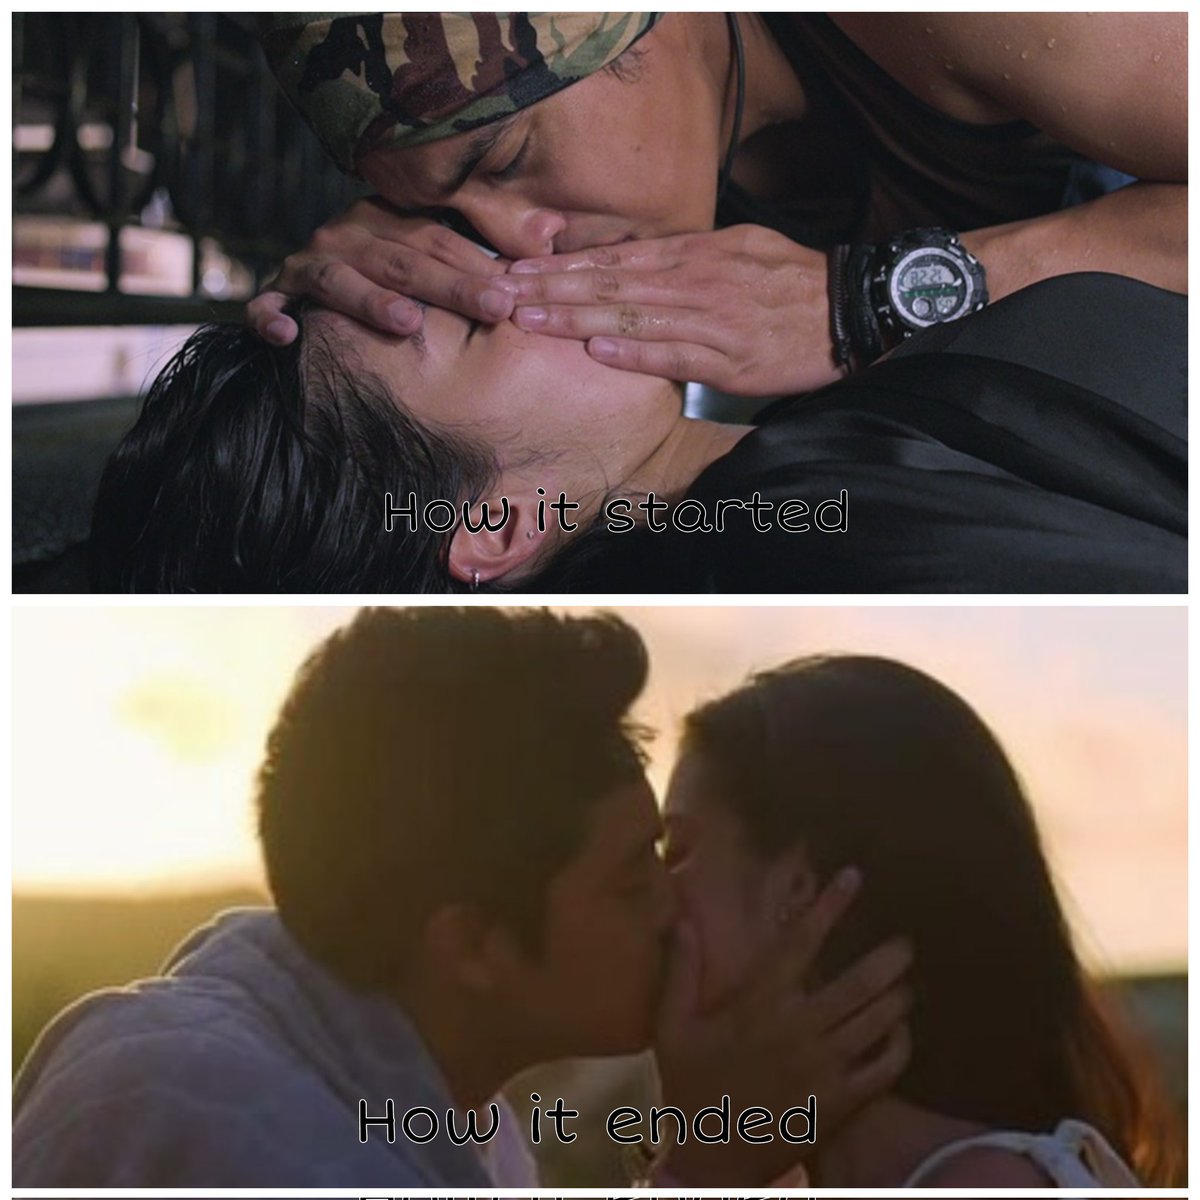 *Belle how it started and how it ended post 😄

*Bubblies how it started and how it ended kineme🫣😁

Ayieee bahala kayo dyn, may amats pa din ako kagabi🤭🫠

#BingLingXieXie
#CantBuyMeLoveFinale
#DonBelle | #CantBuyMeLove